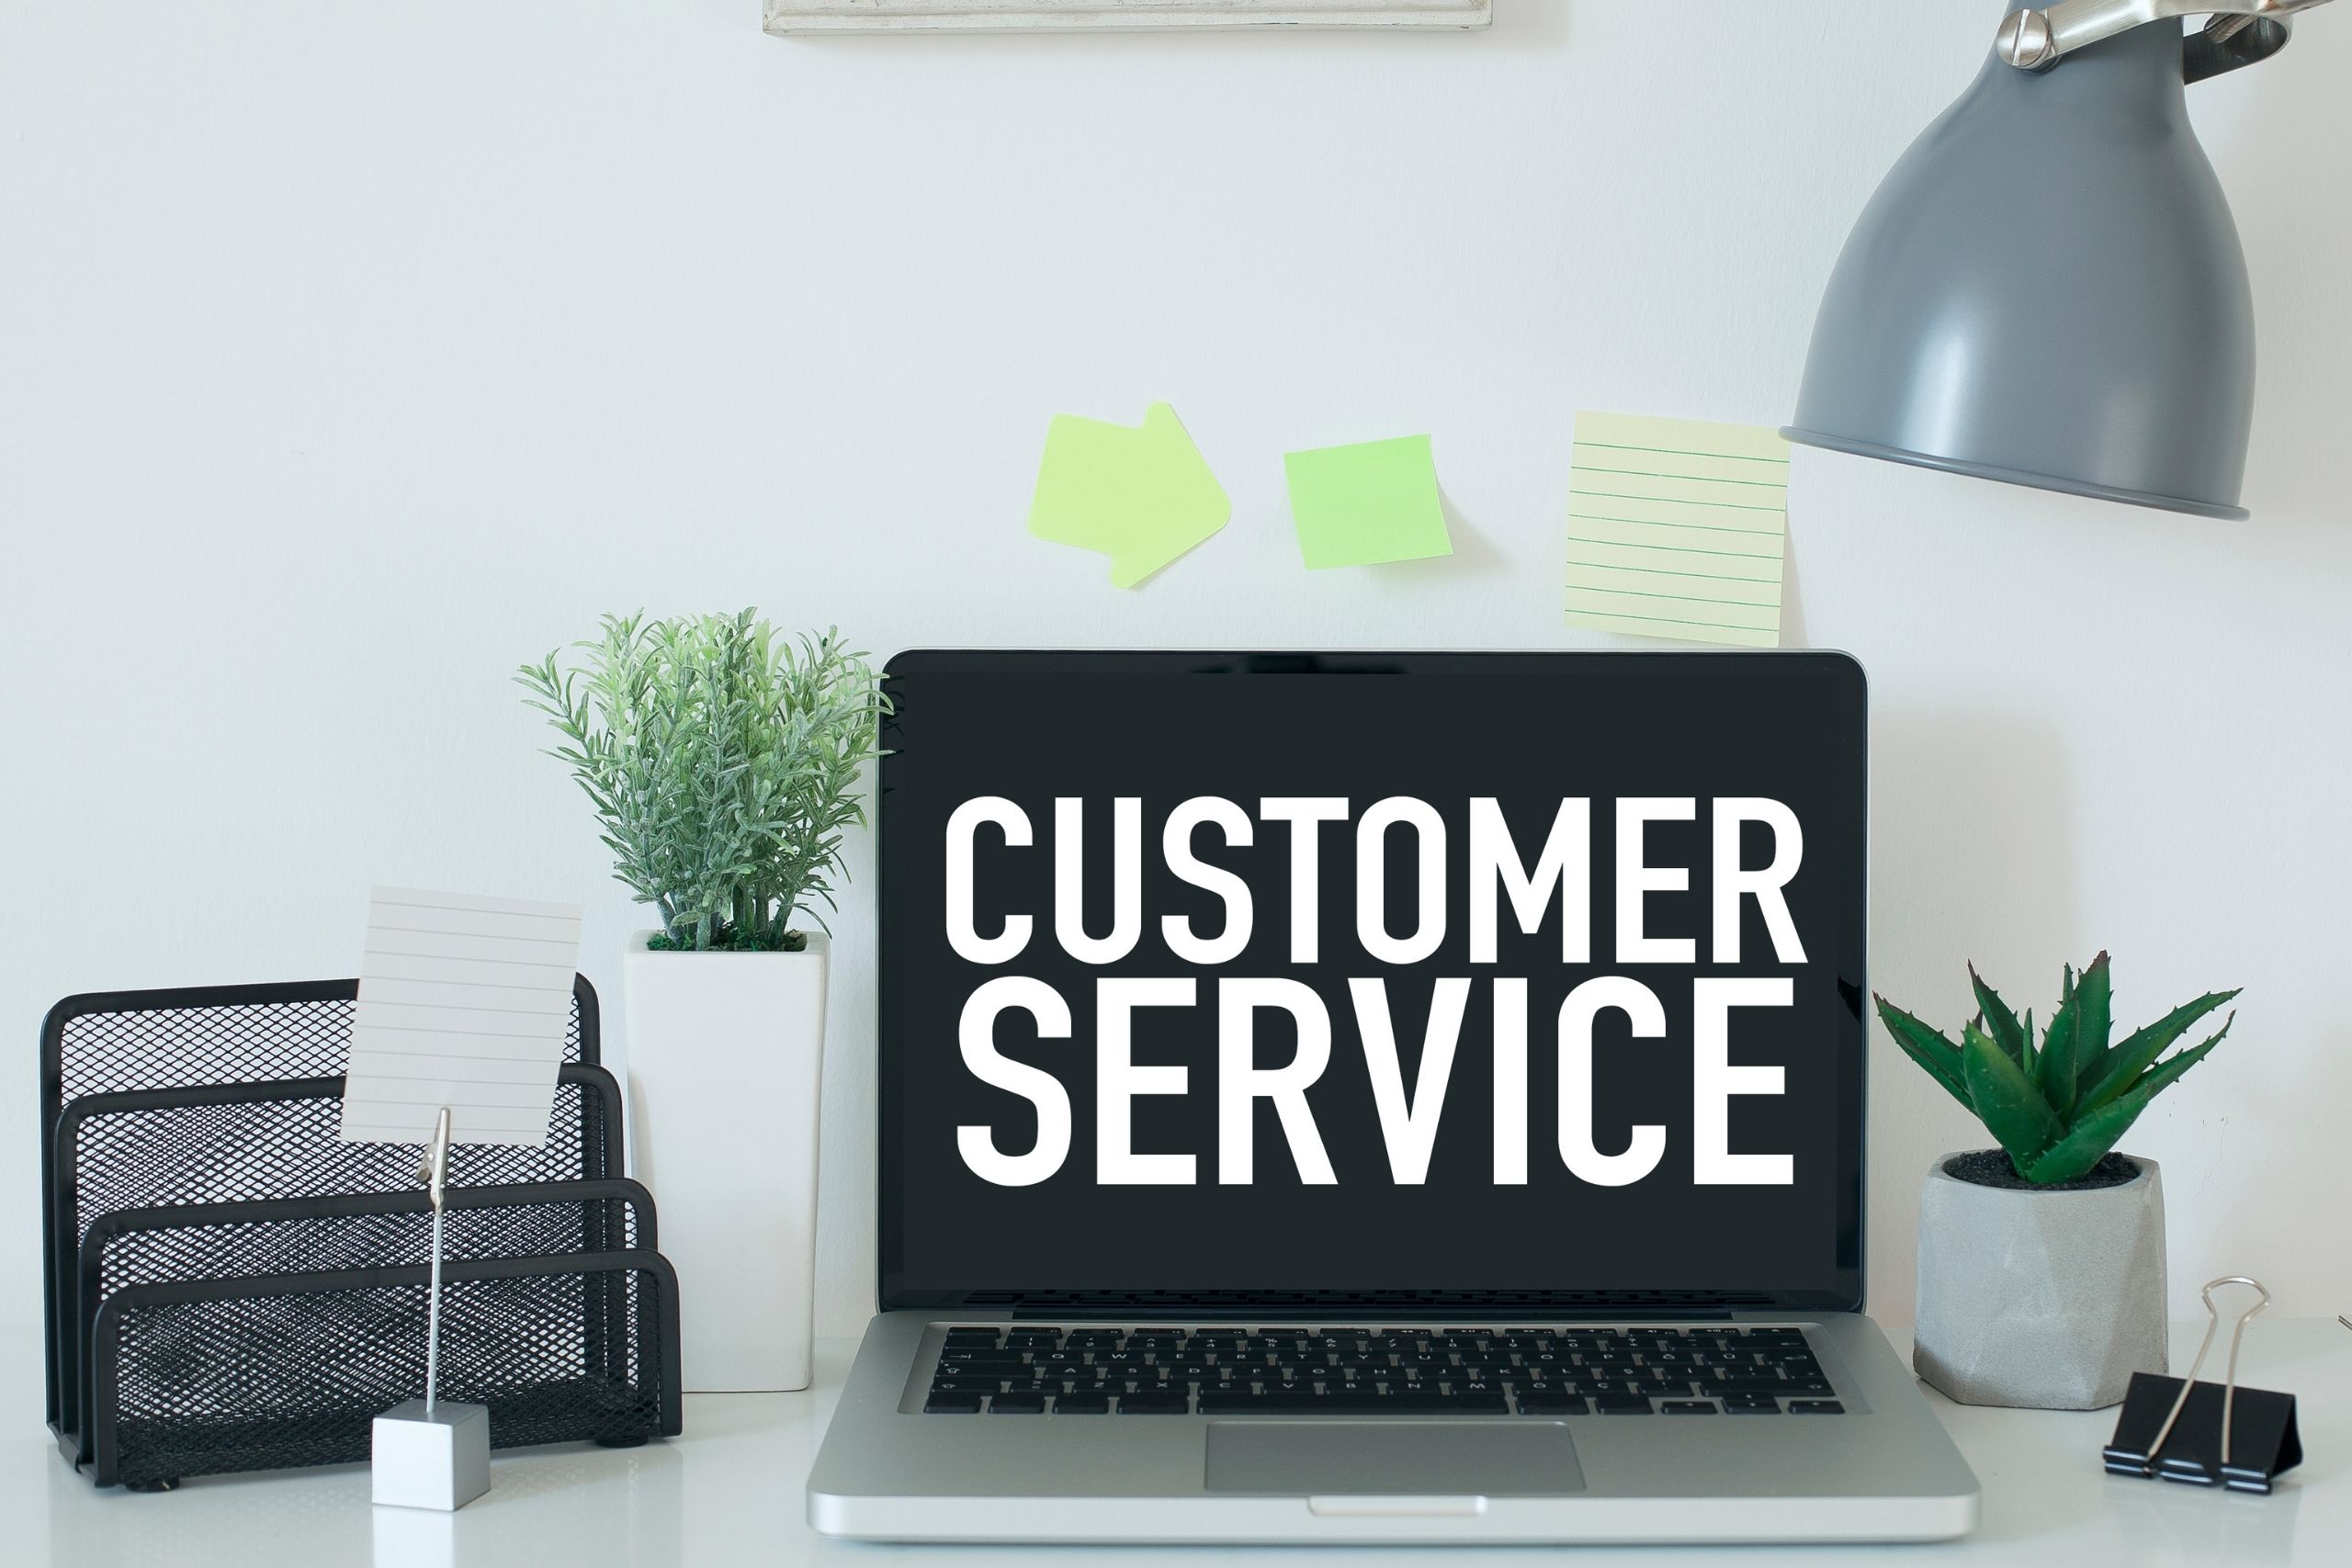 TTS for customer service is a helpful addition to your support team.